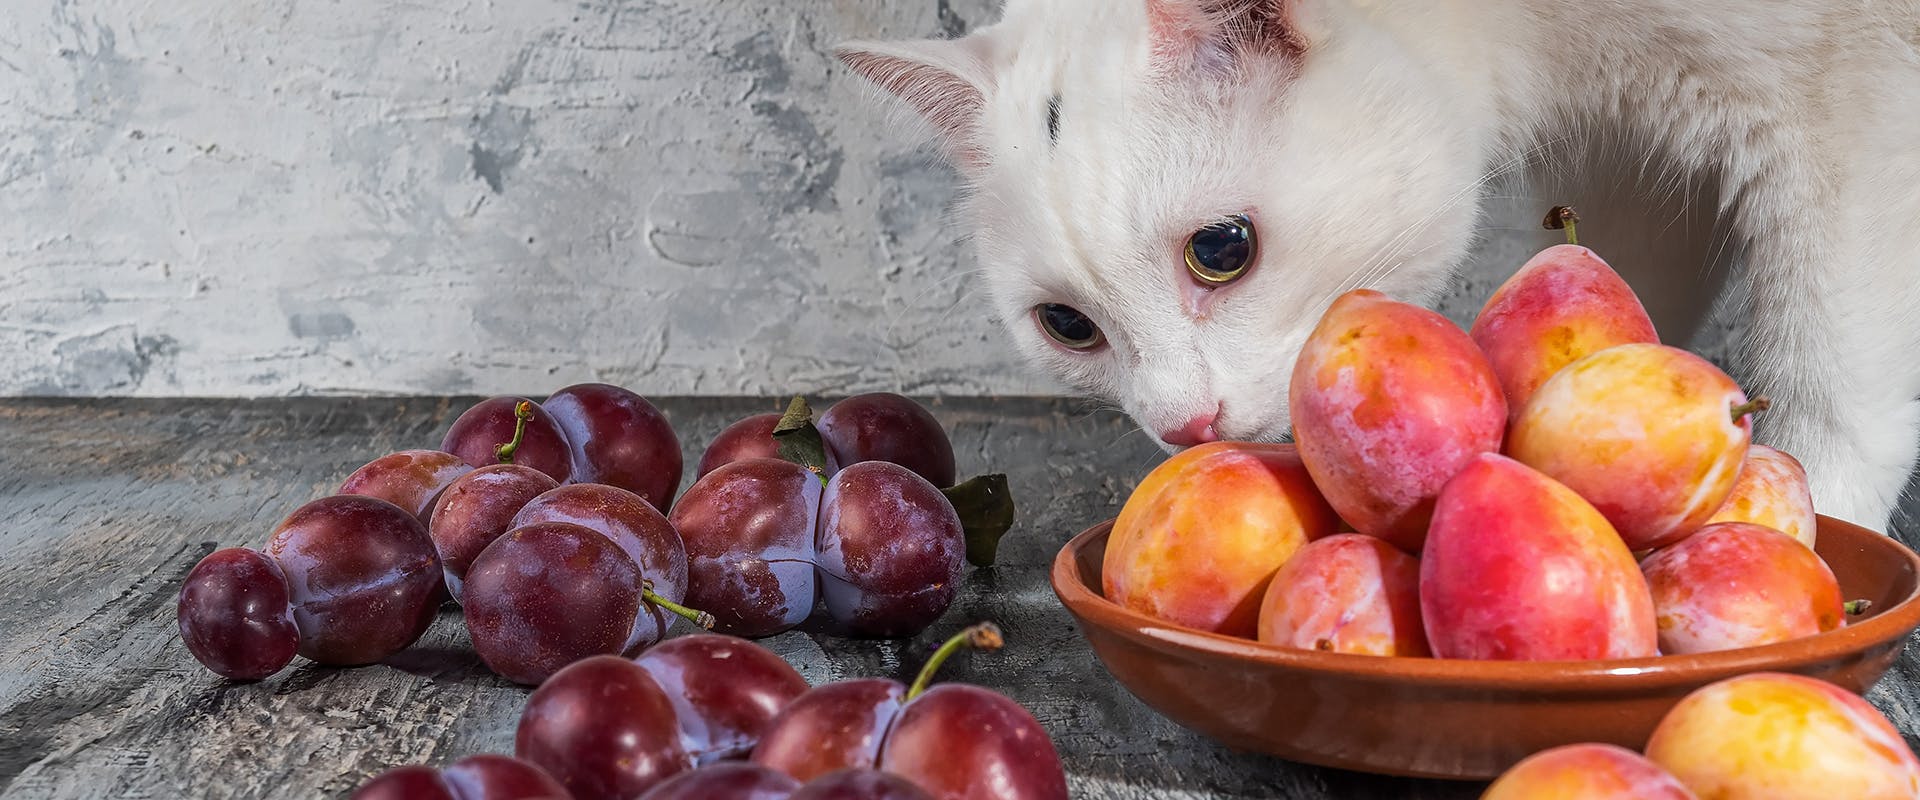 A white cat sniffing at a bowl of plums